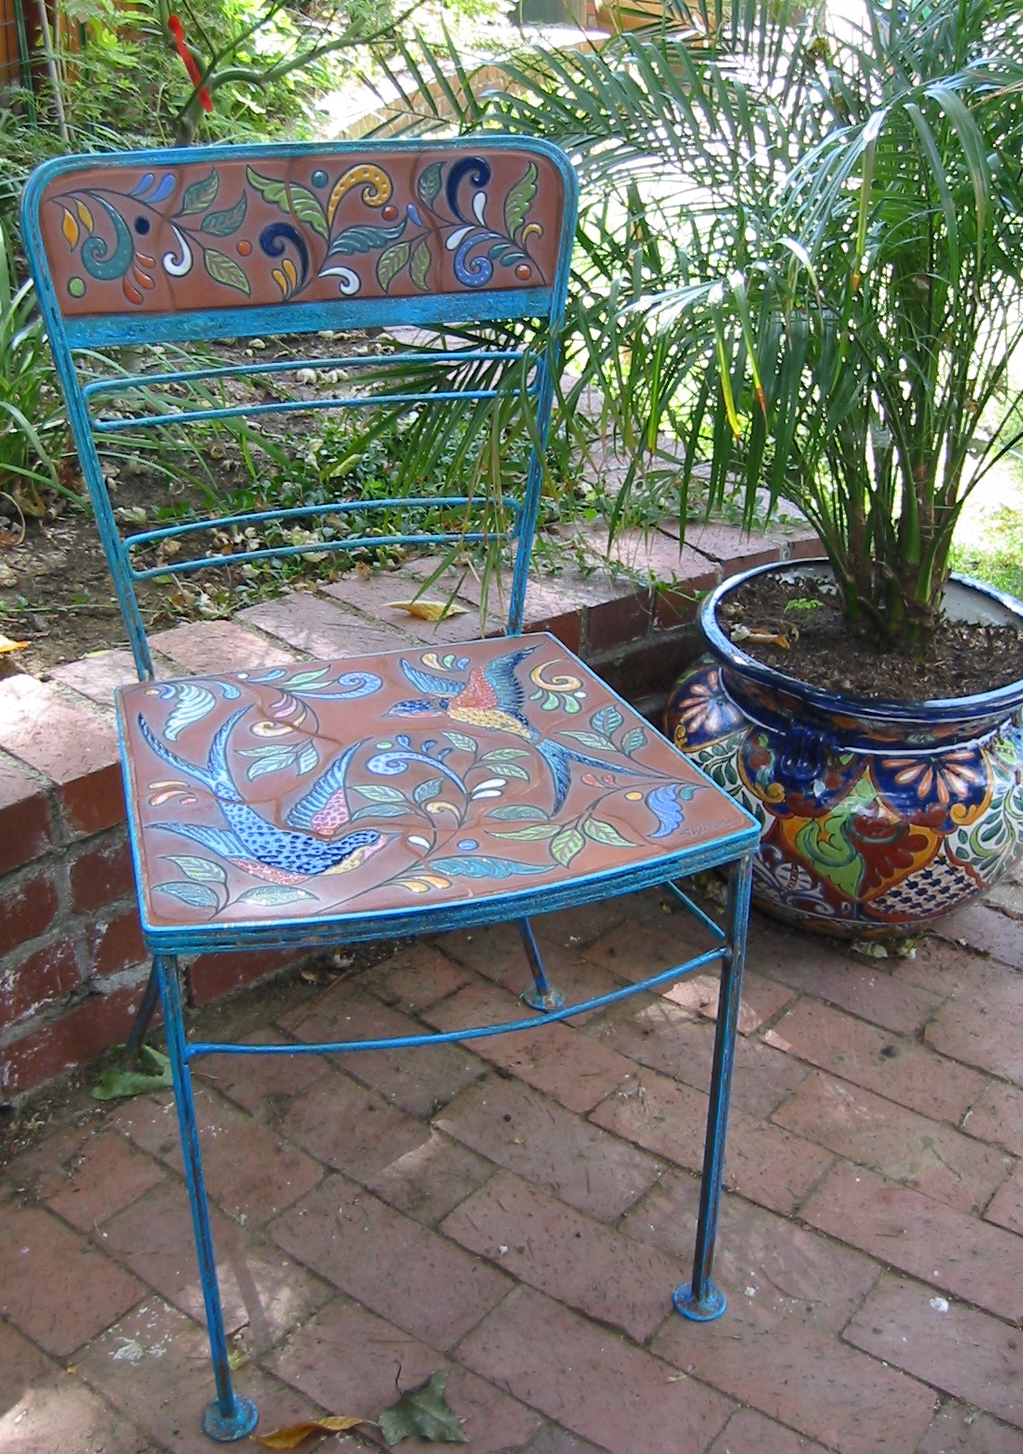 Colorful Ceramic Swallow Chair Using Recycled Metal Frame